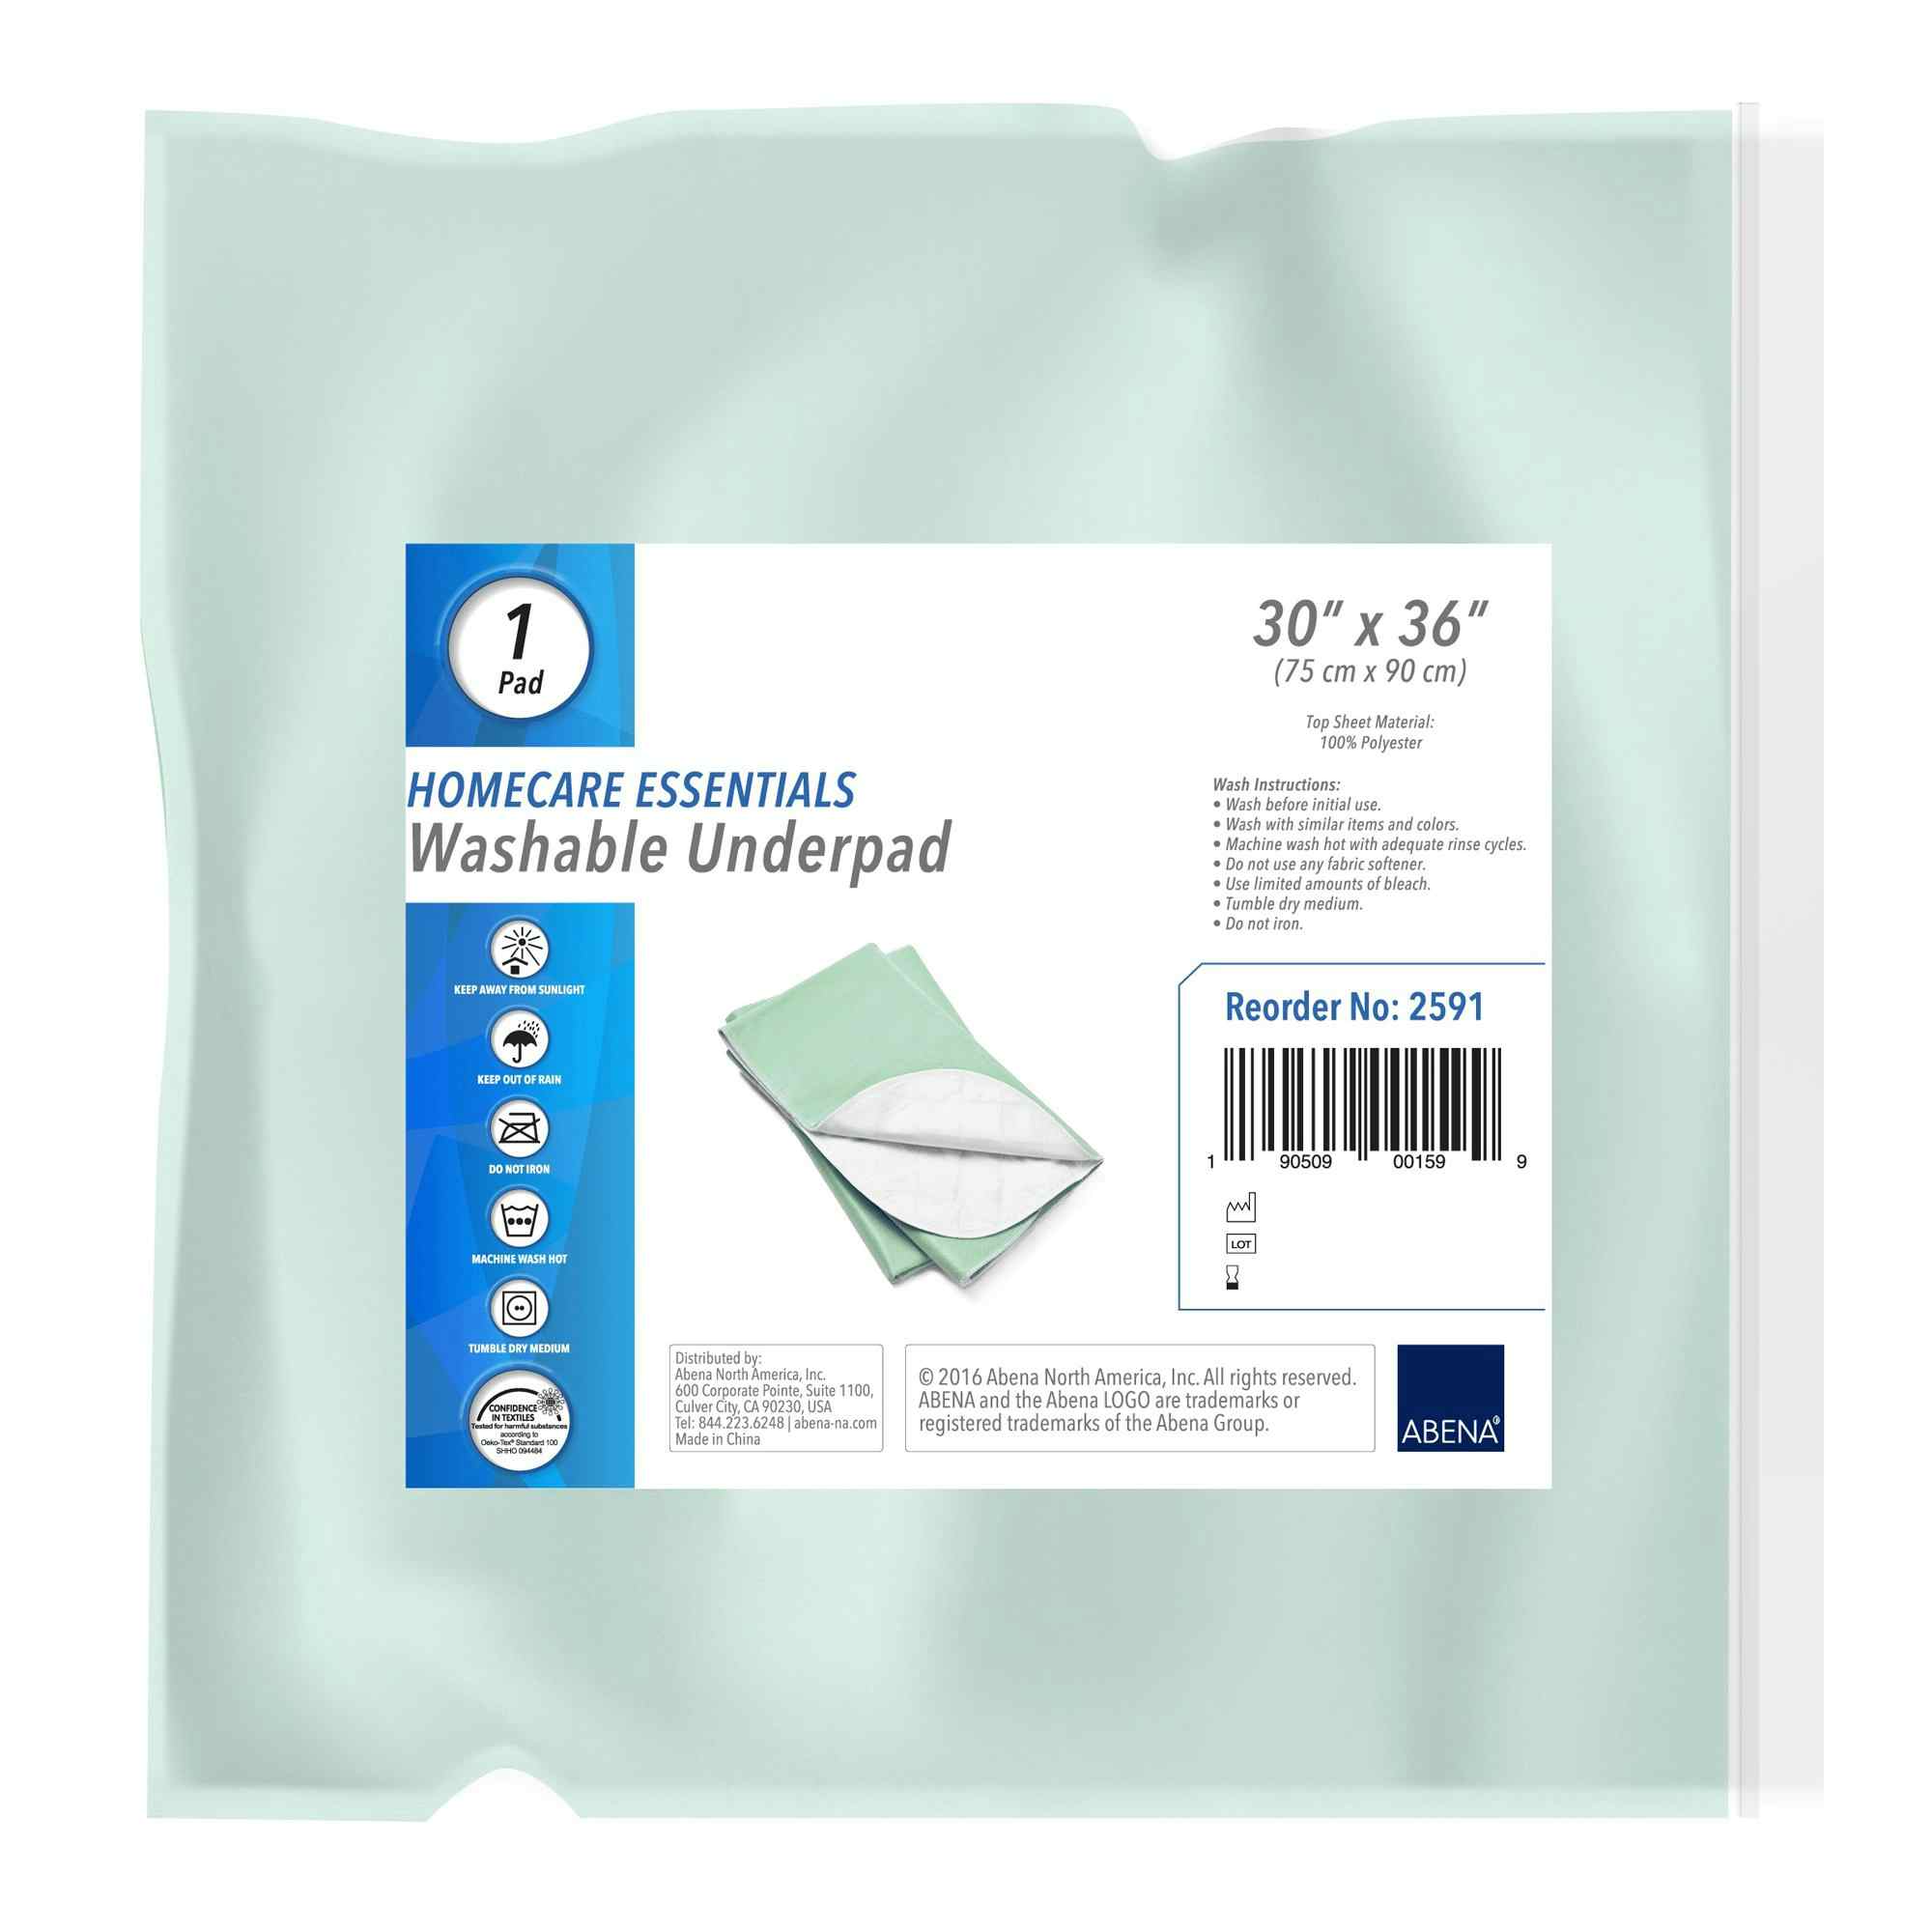 Homecare Essentials Washable Underpad, Moderate Absorbency